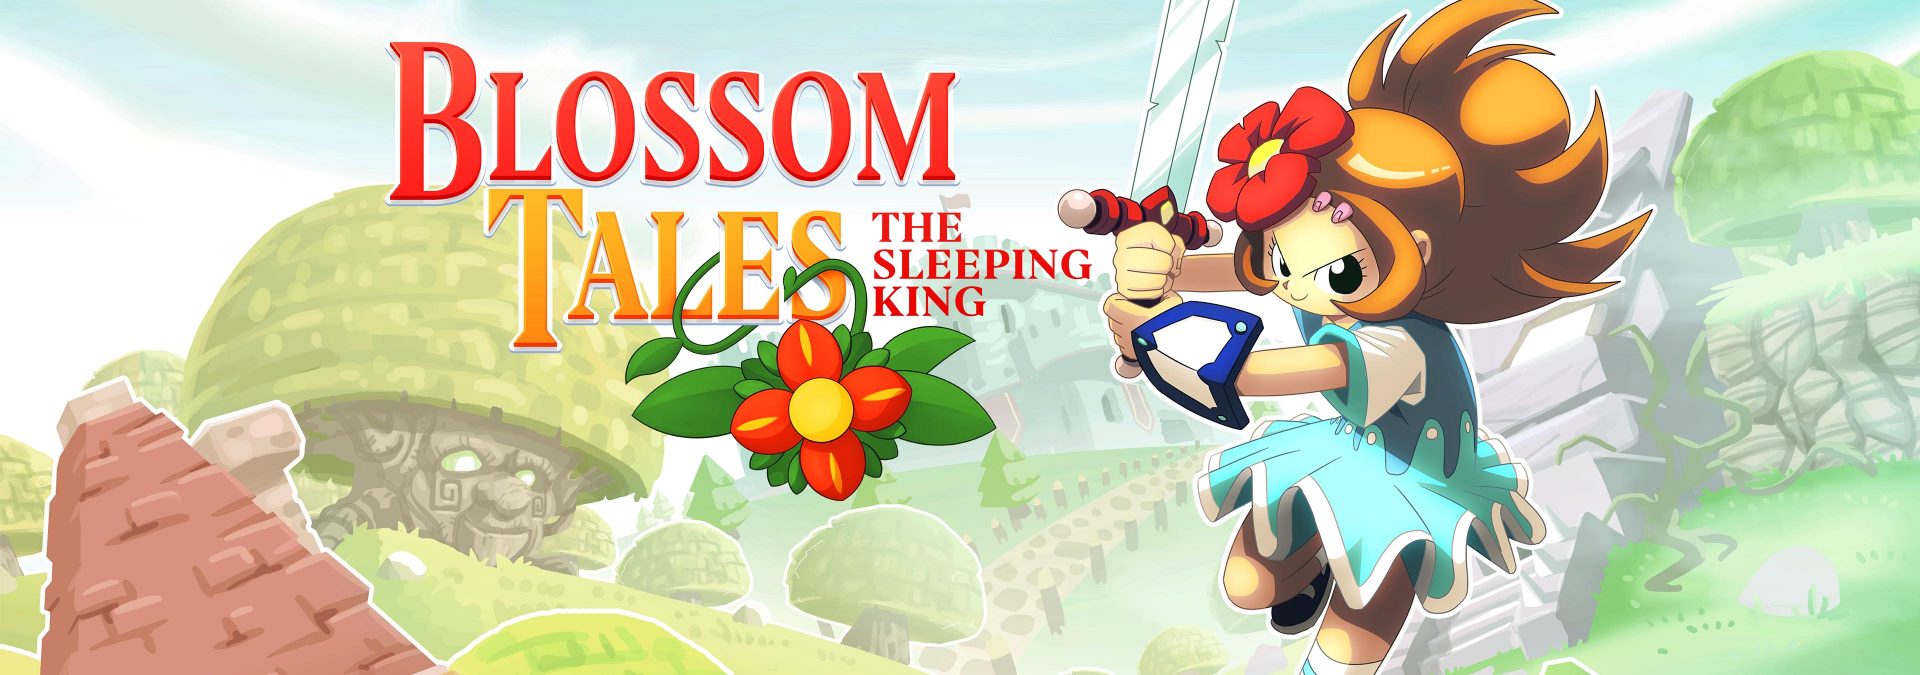 Blossom Tales